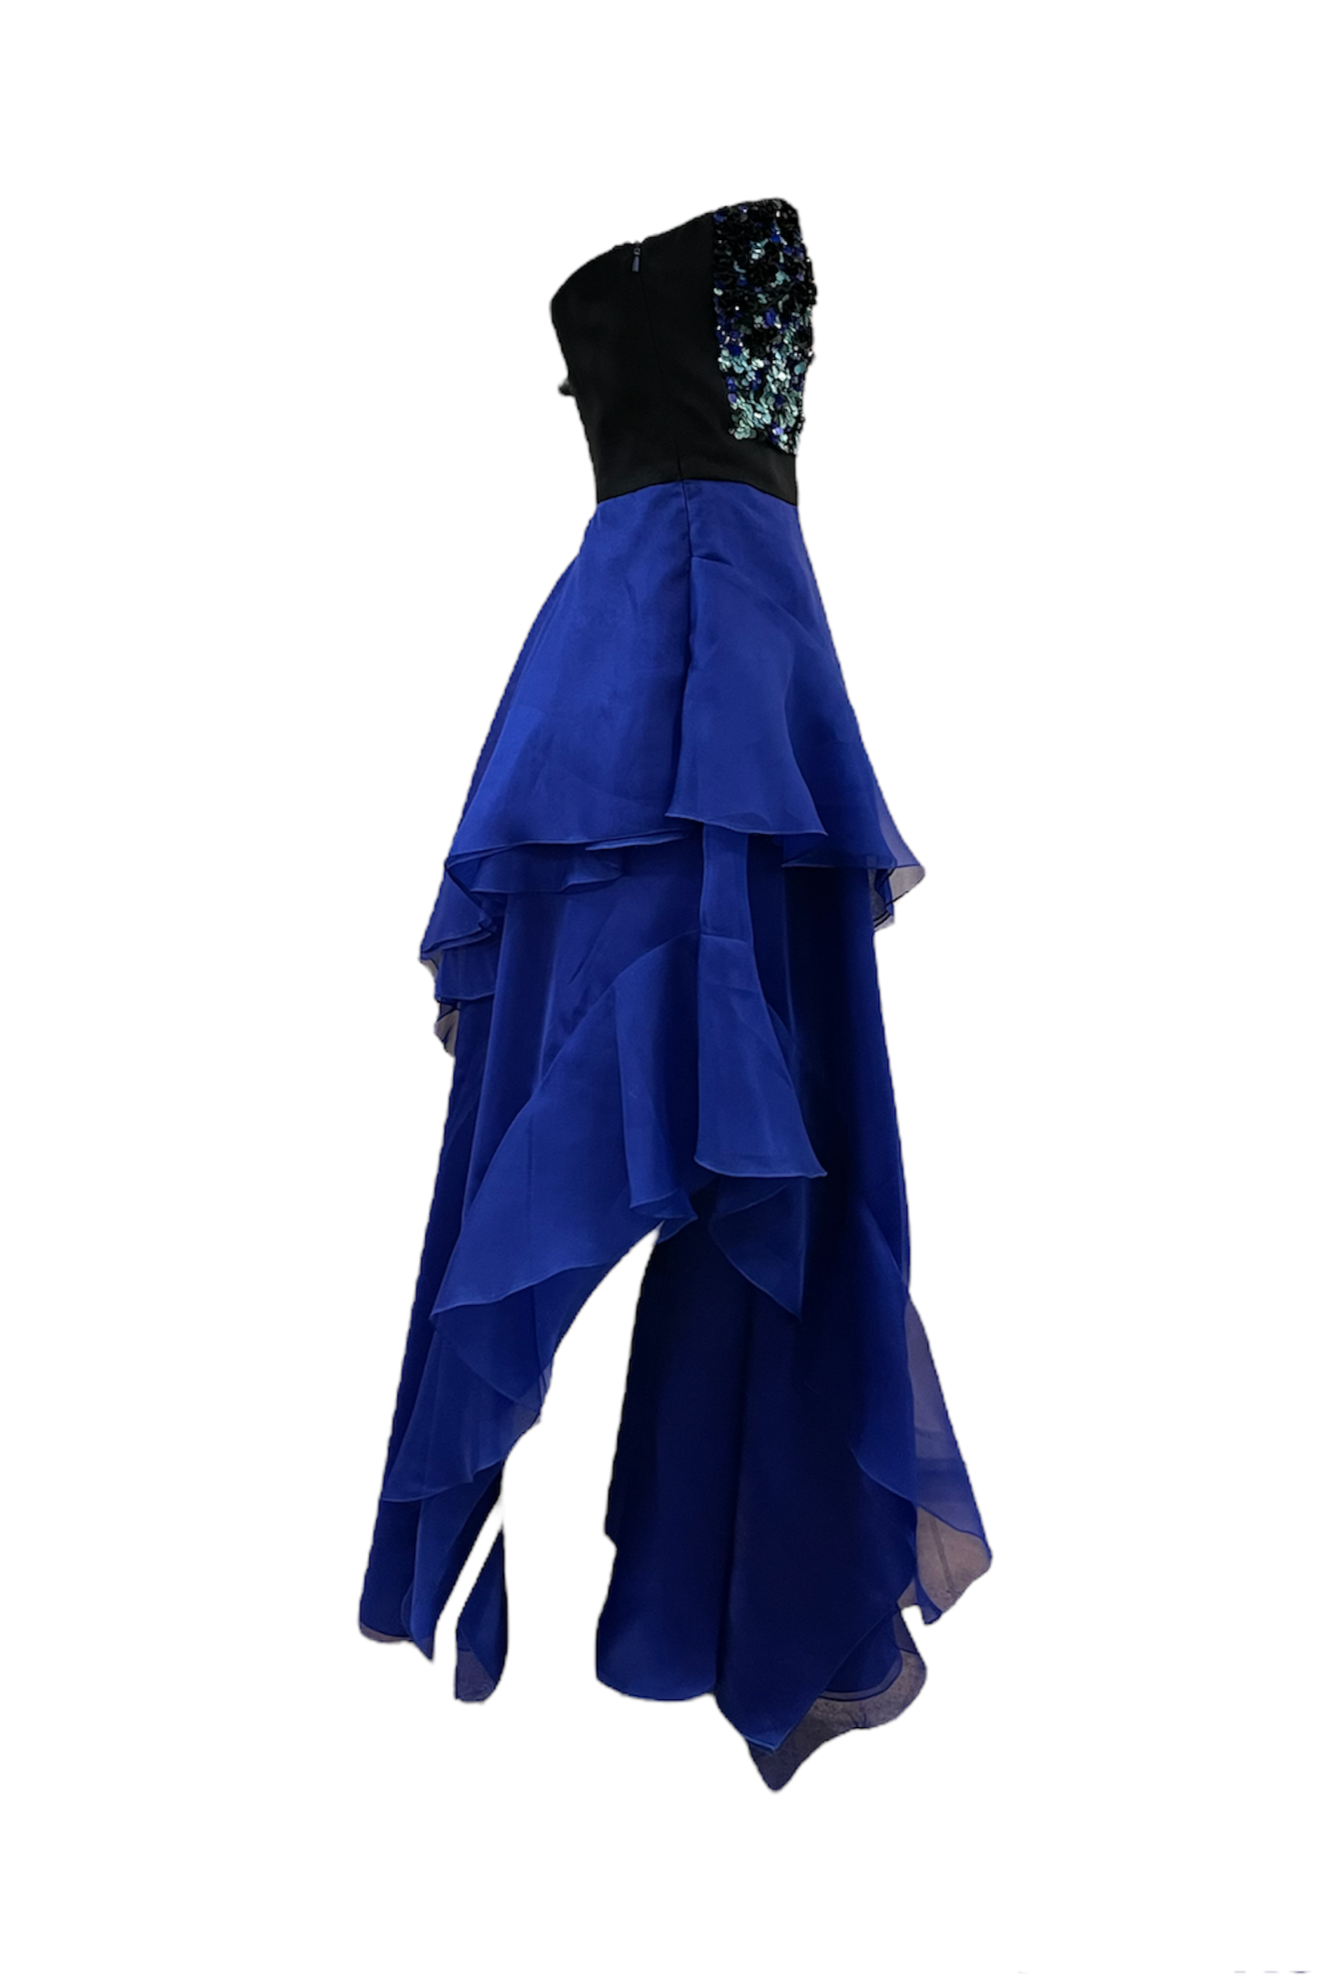   J Mendel Contemporary Blue Organza Strapless Gown with Sequin Top SIDE 2 of 6